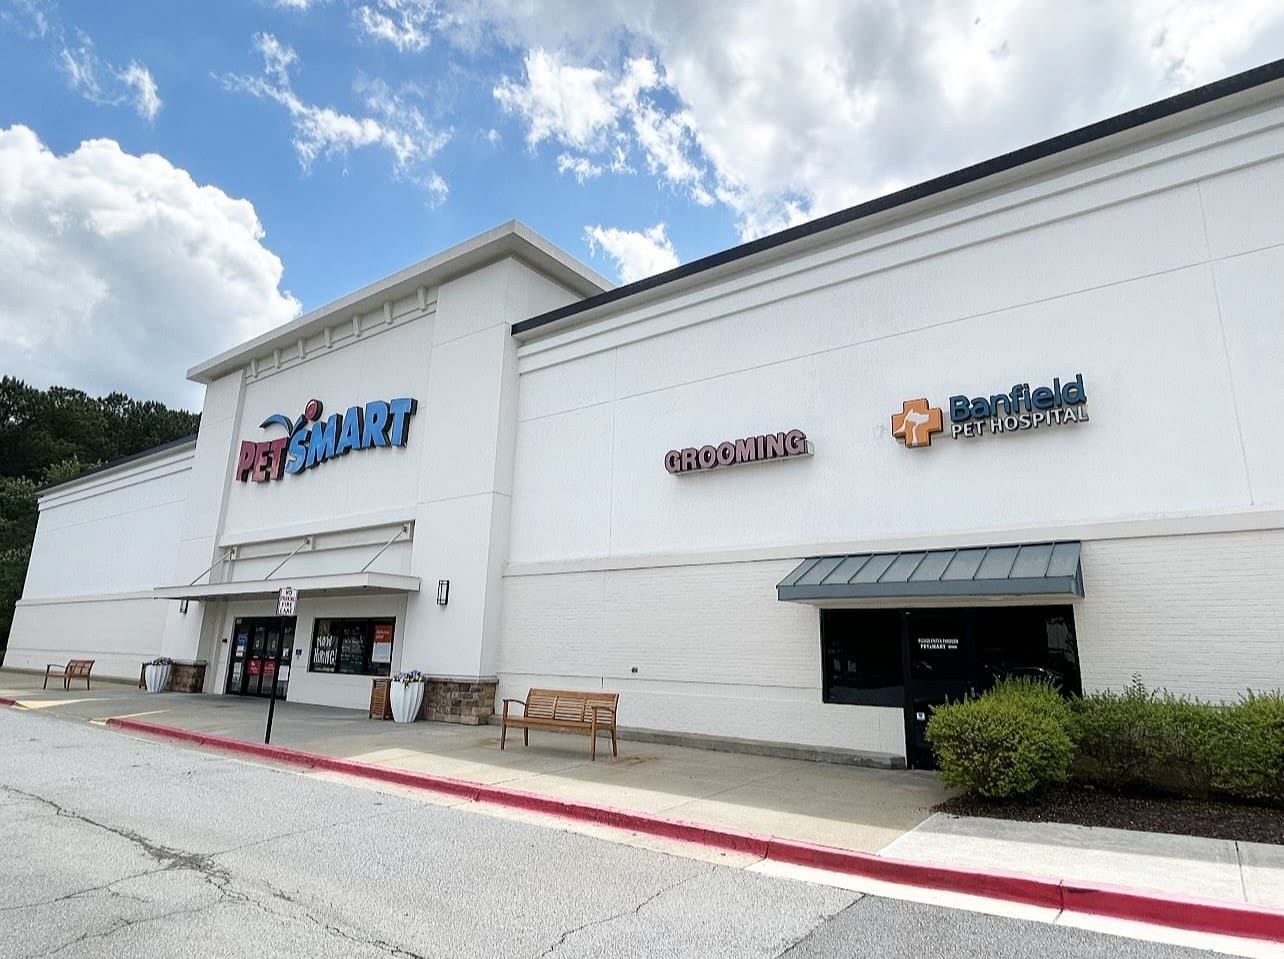 The entrance to Banfield and PetSmart